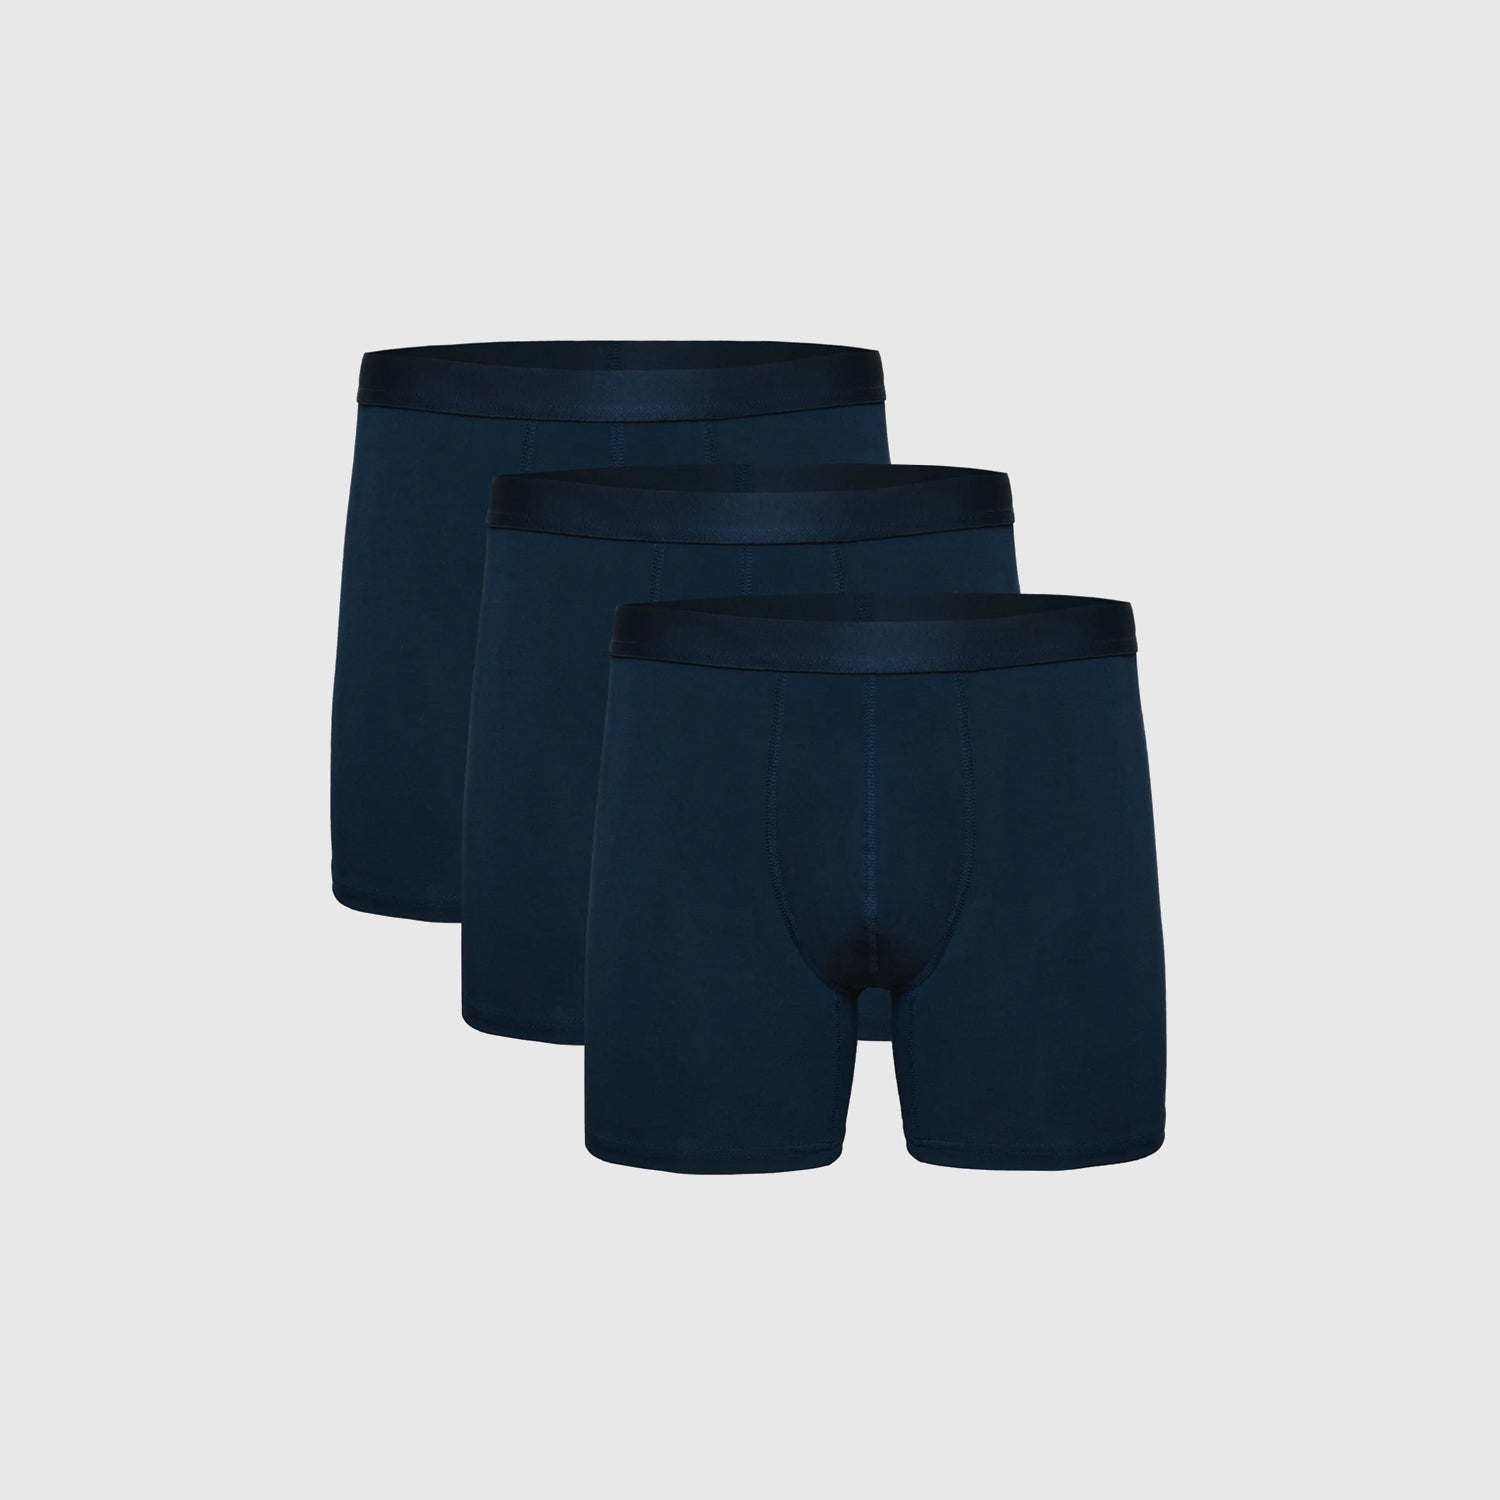 Buy Hollister. Underwear, Trunks and Boxers (Navy Classic, X-Small) at